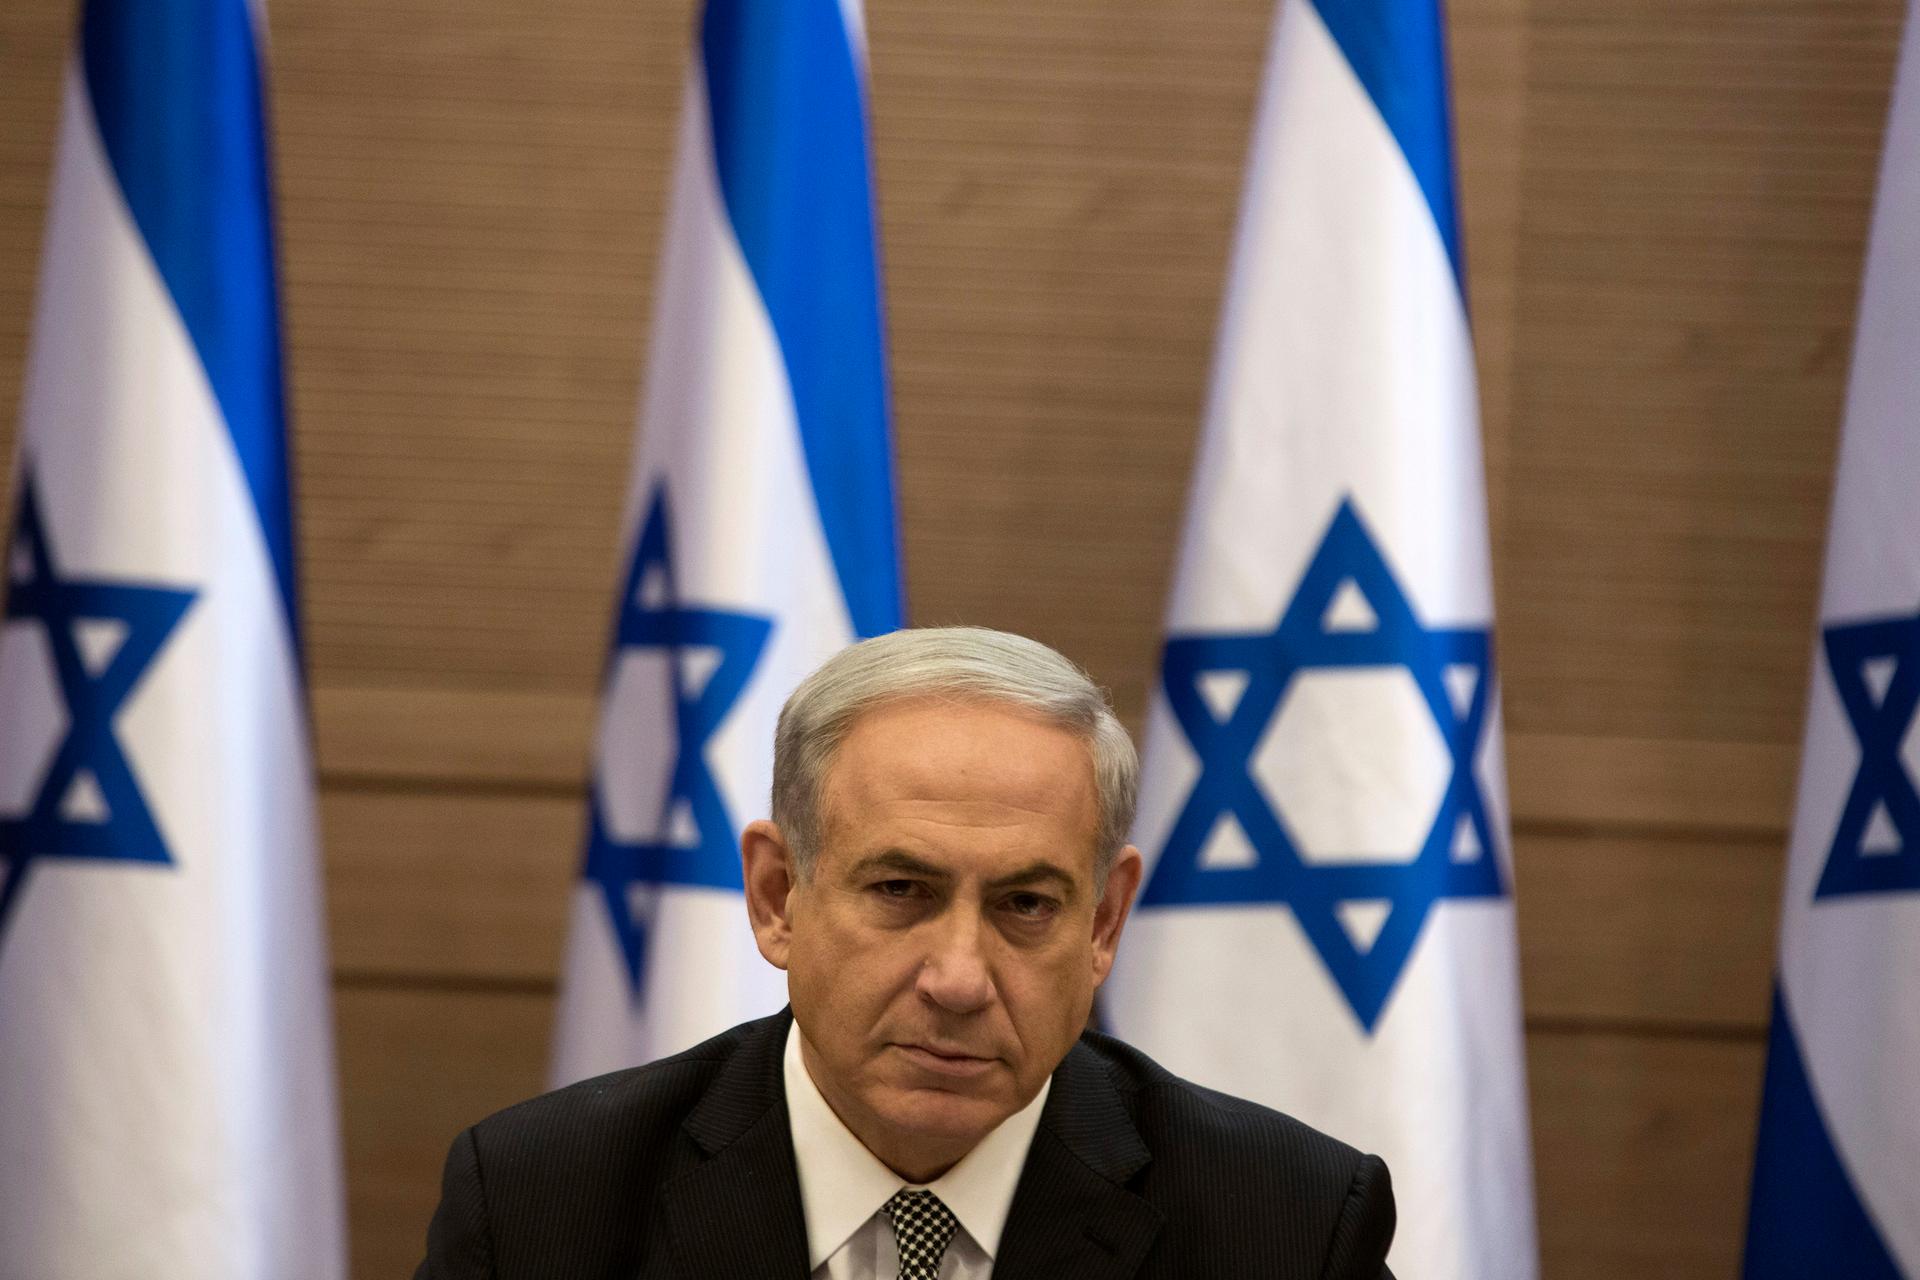 Israel's Prime Minister Benjamin Netanyahu heads a cabinet meeting in Jerusalem, Thursday. So far, his government has enjoyed the support of the Israeli people in the conflict with Hamas.